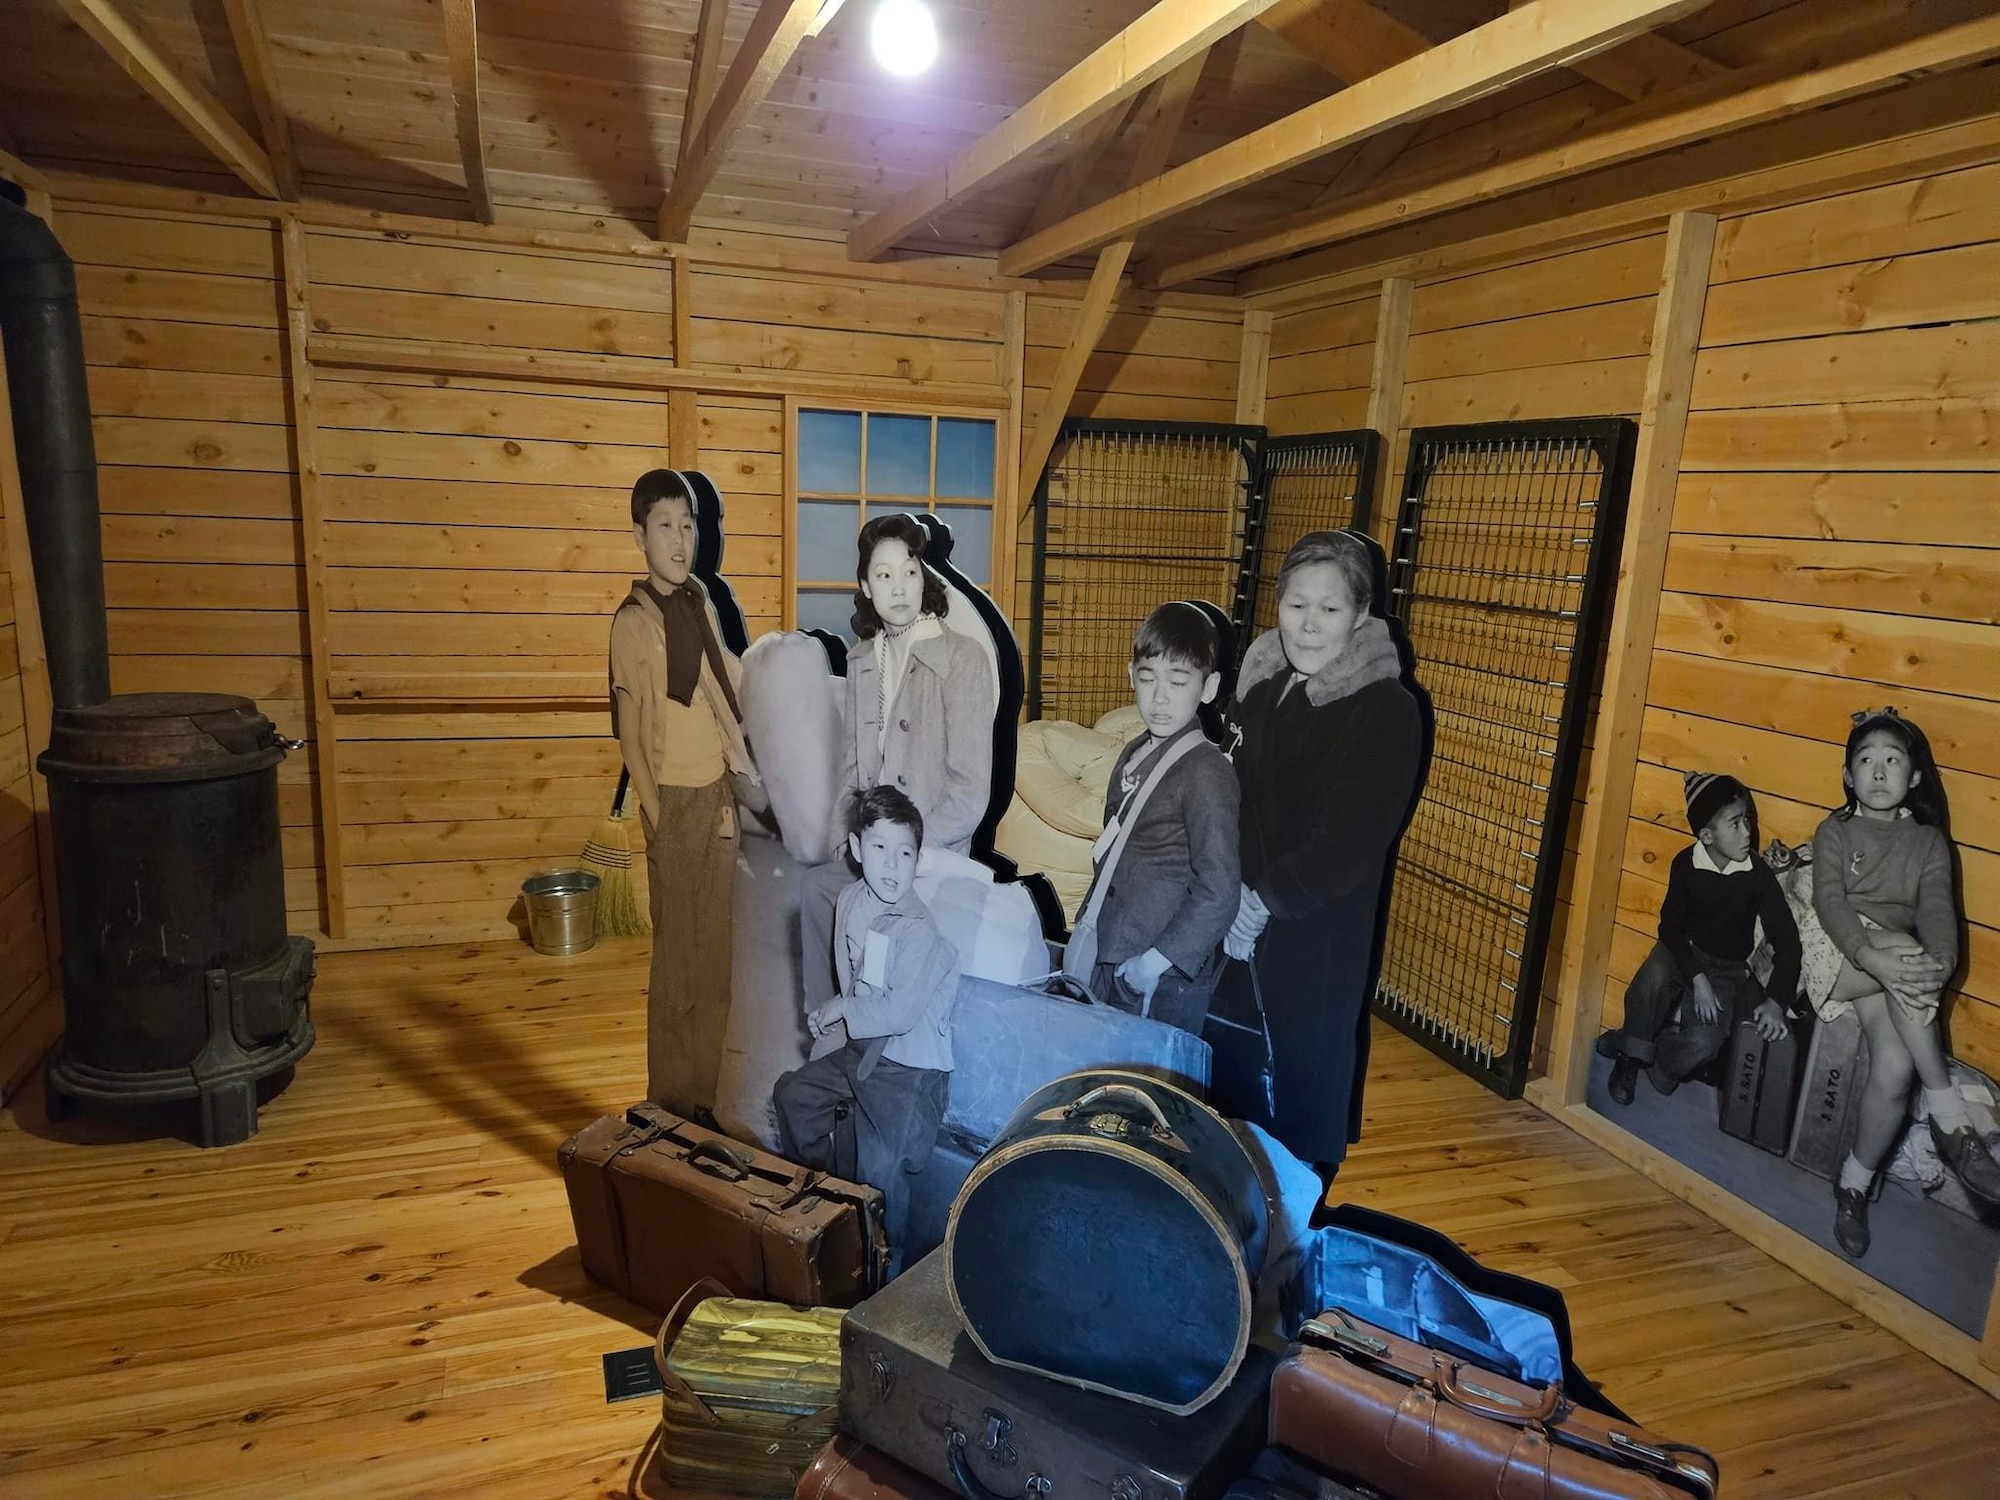 cardboard cut outs of a Japanese American family standing in what would be an allotted room at Heart Mountain internment camp